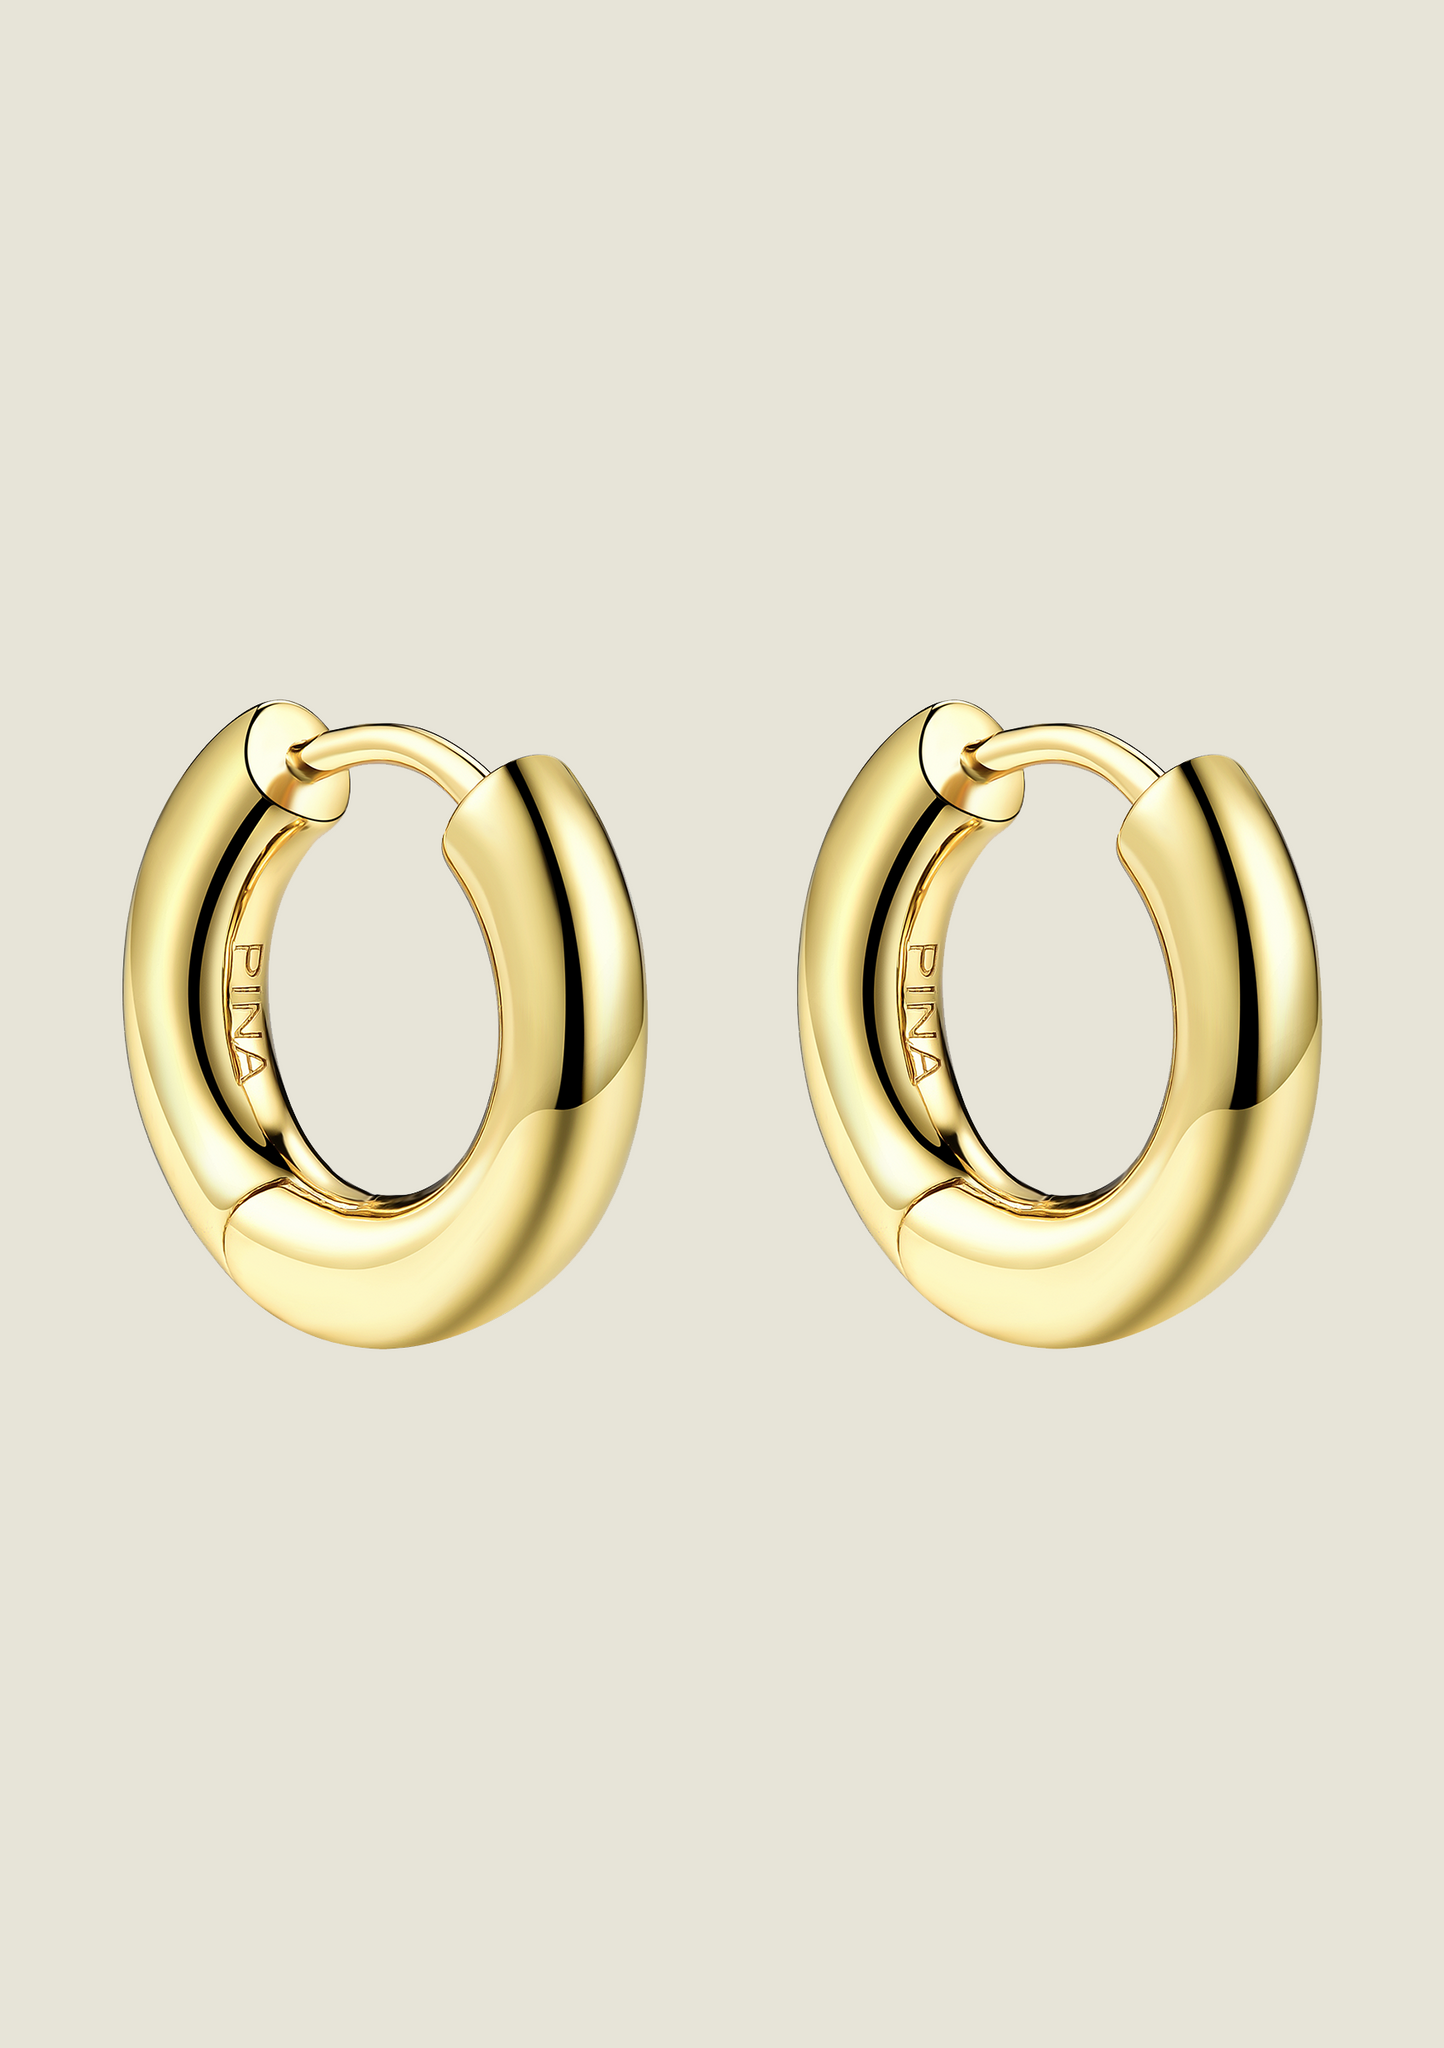 Gold Hoops - Includes 2x Free Solid Colour Daisy Charms!